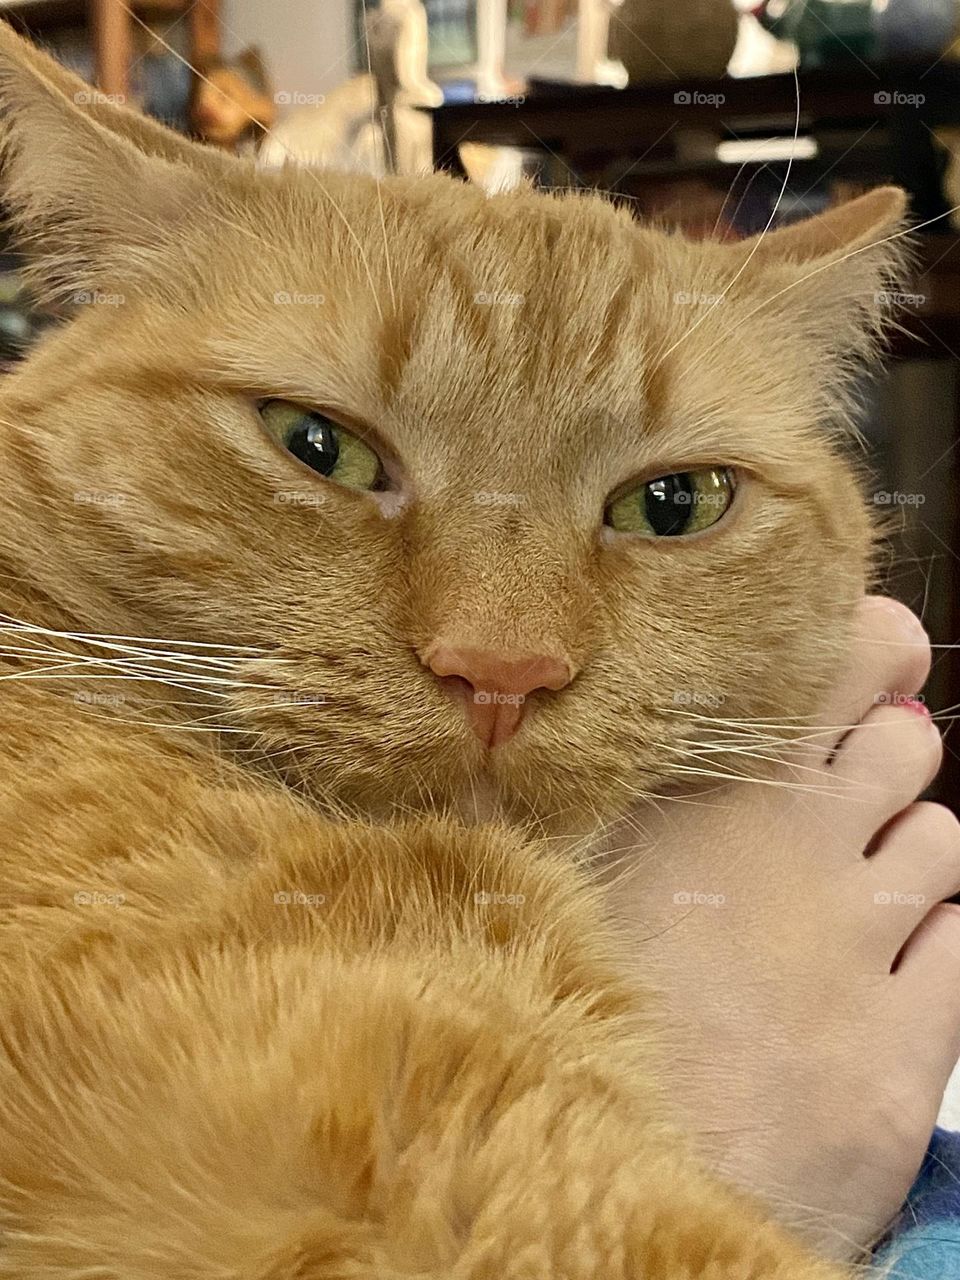 An orange tabby cat using a persons foot as a pillow